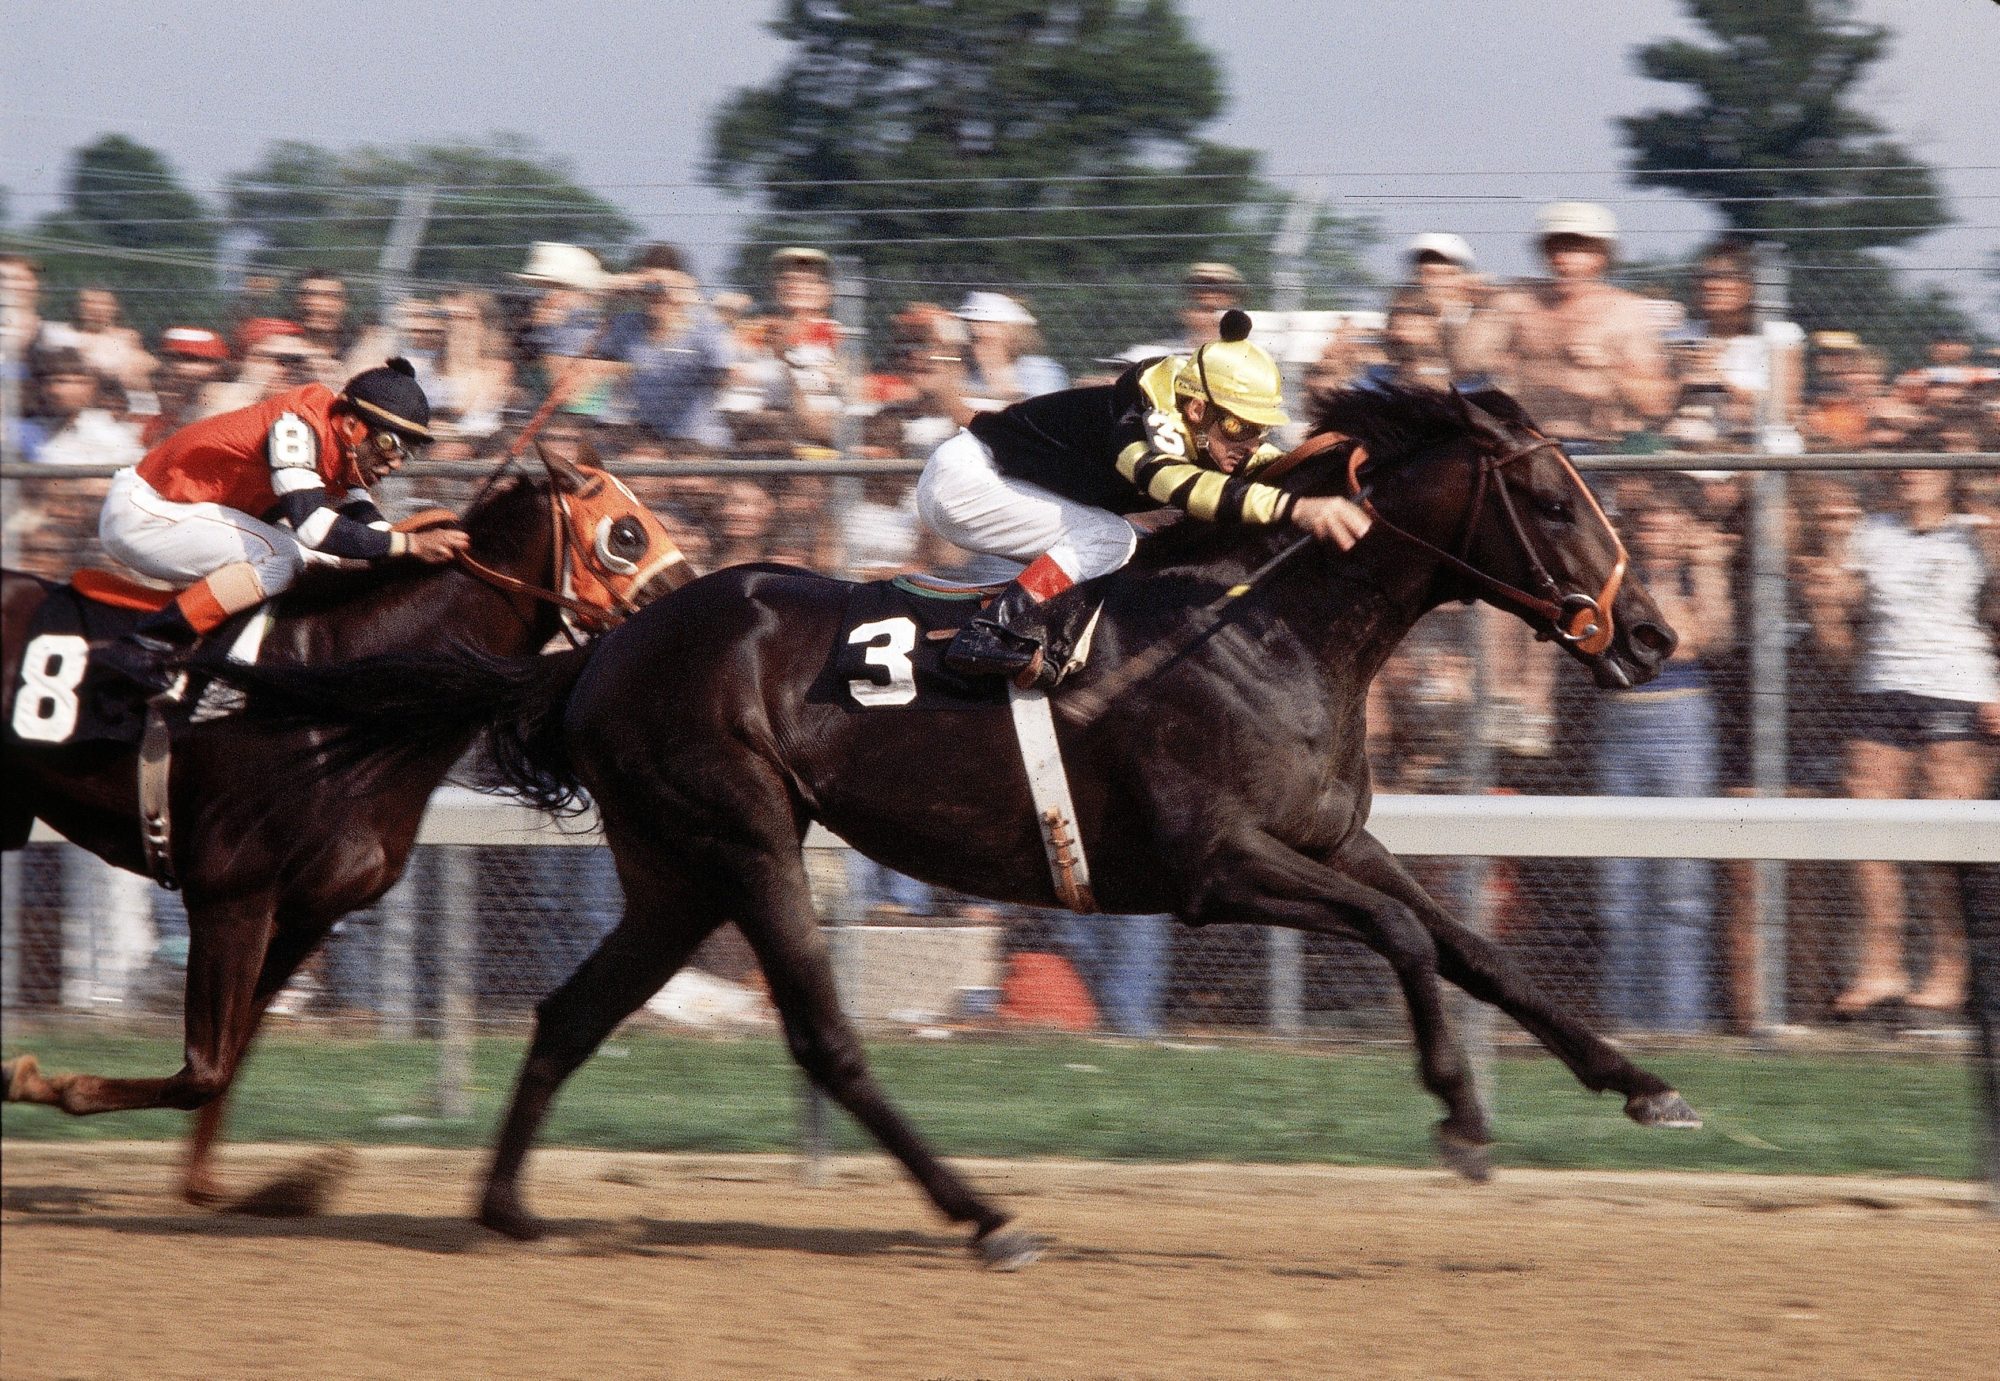 Jockey Jean Cruguet on Seattle Slew (saddle #3) at the 1977 Kentucky Derby 